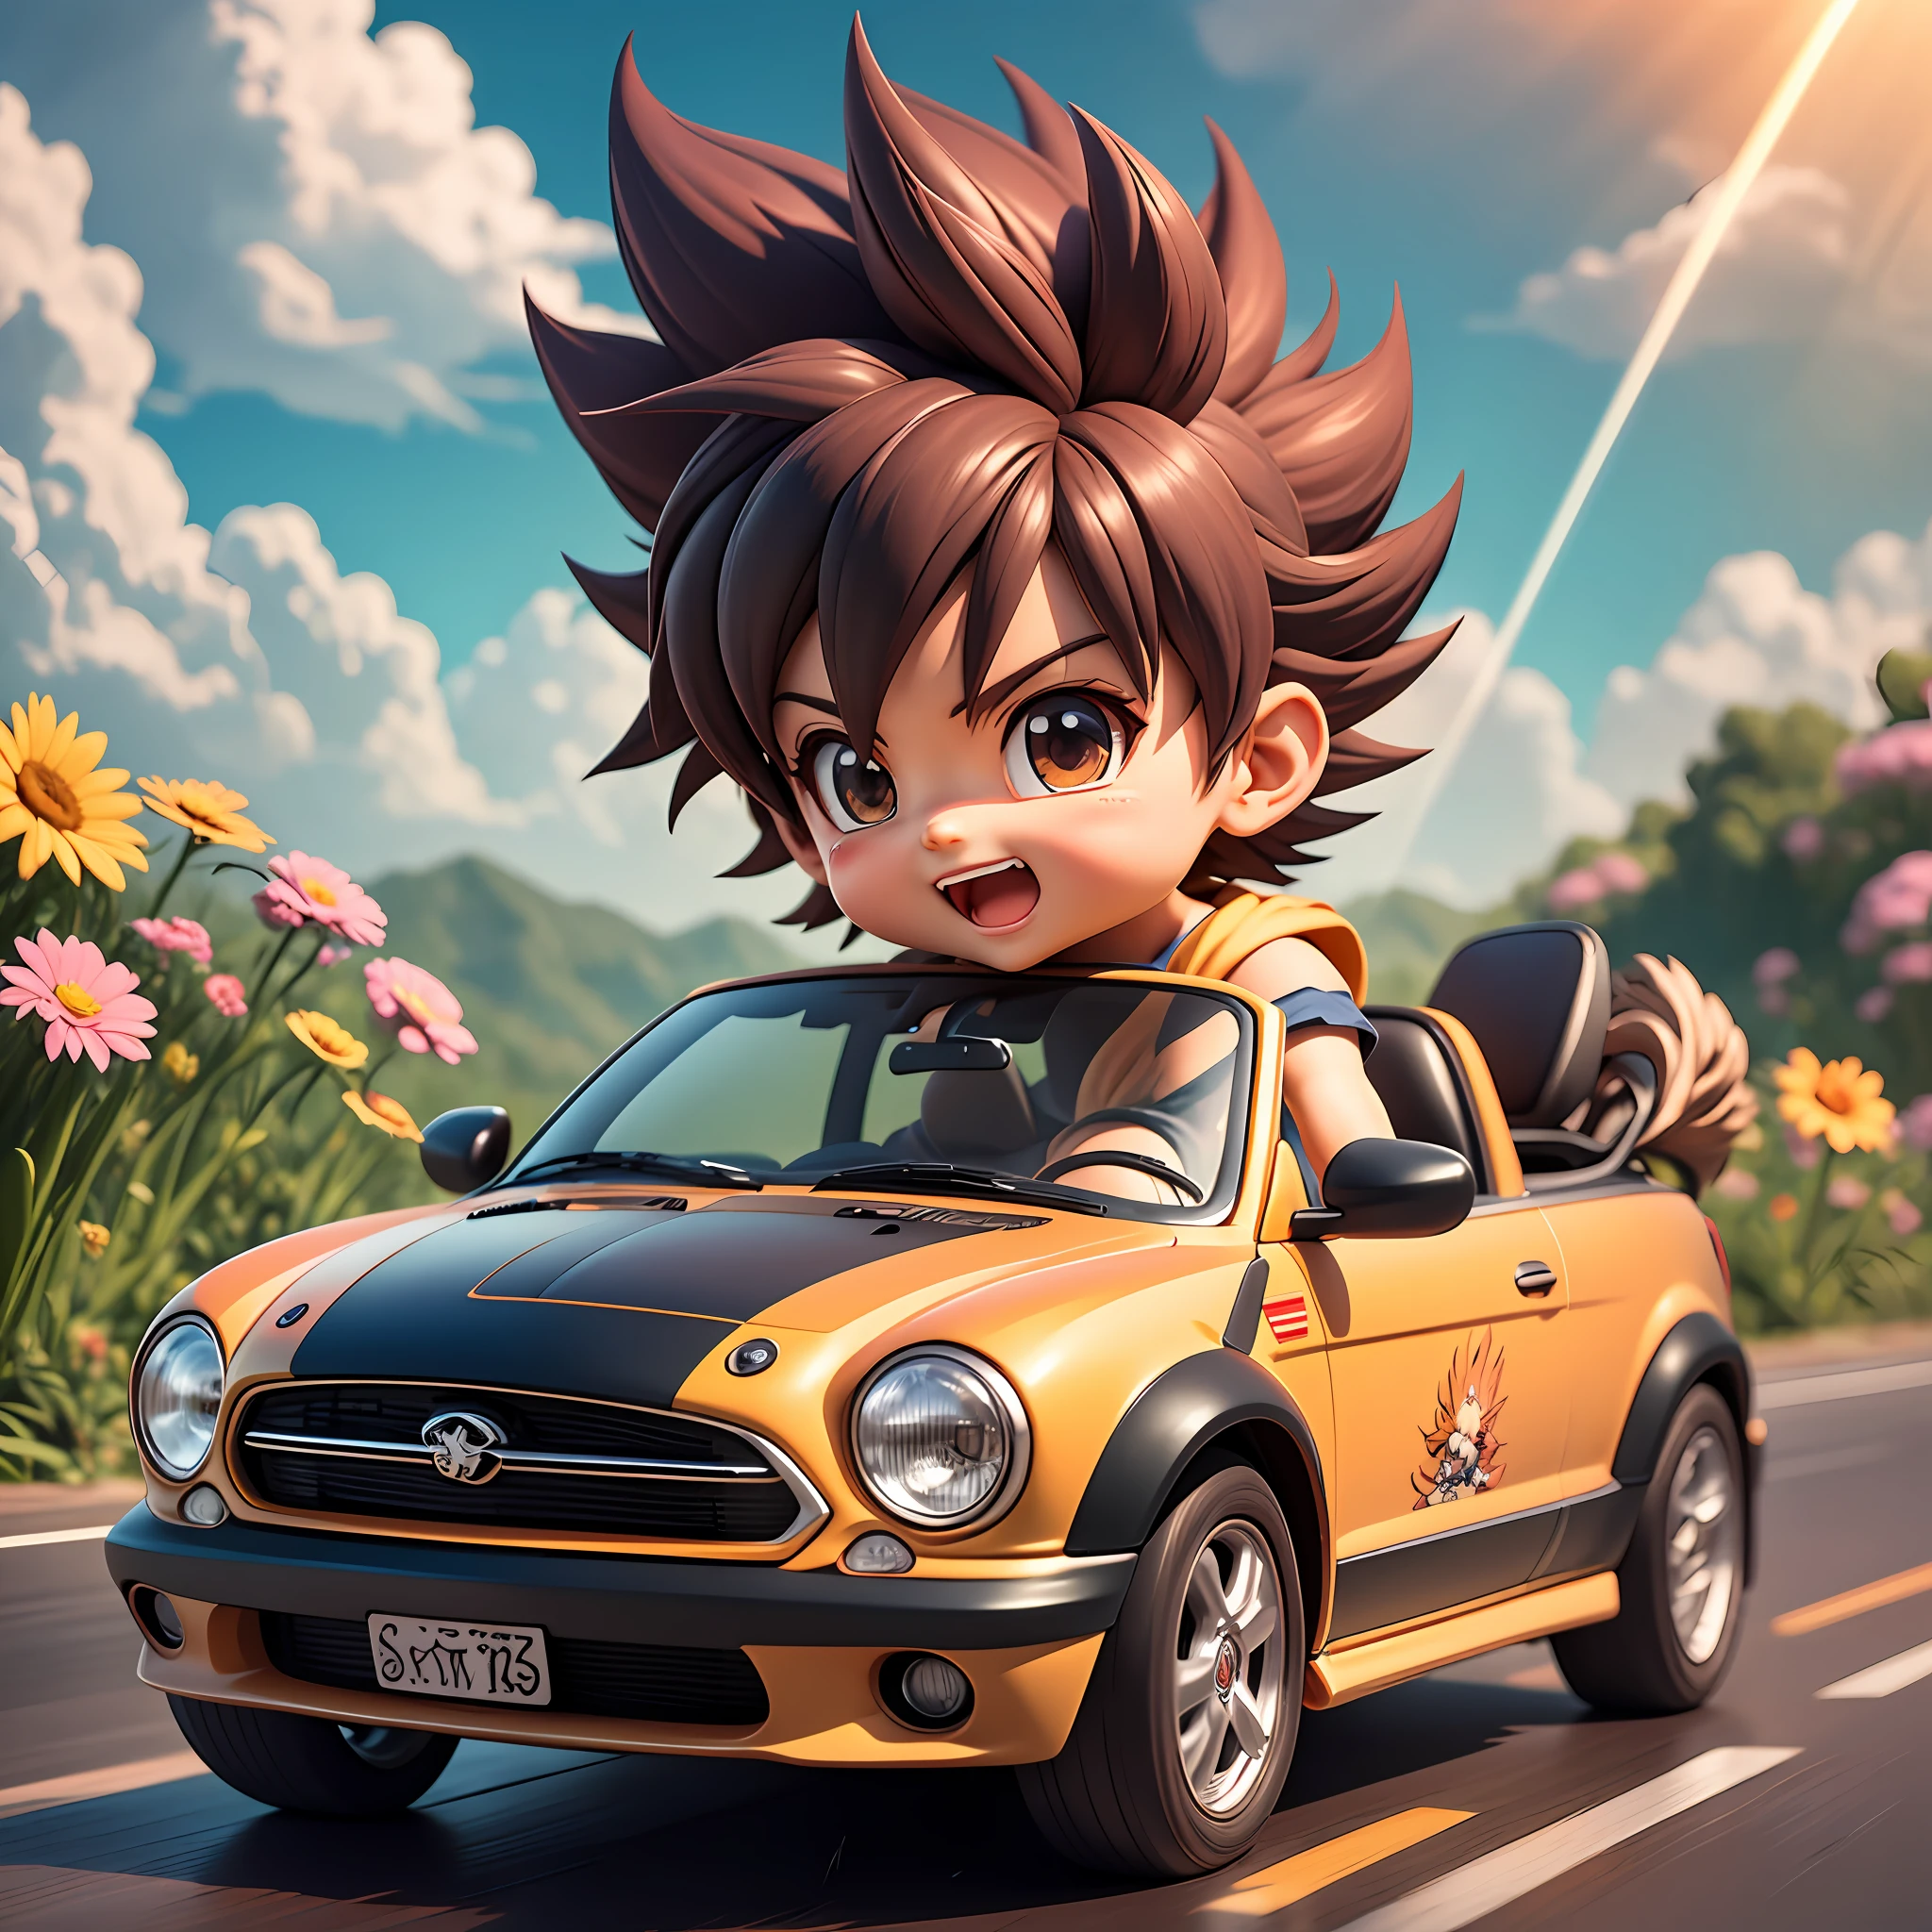 rains，Clouds，sunrays，highway，Little boy driving a convertible，son goku，SuperSaiyan，big laughter，Spiked hairstyle，Flowers，yama，kali，The bird，Rich colors，The Masterpiece，chibi，full body